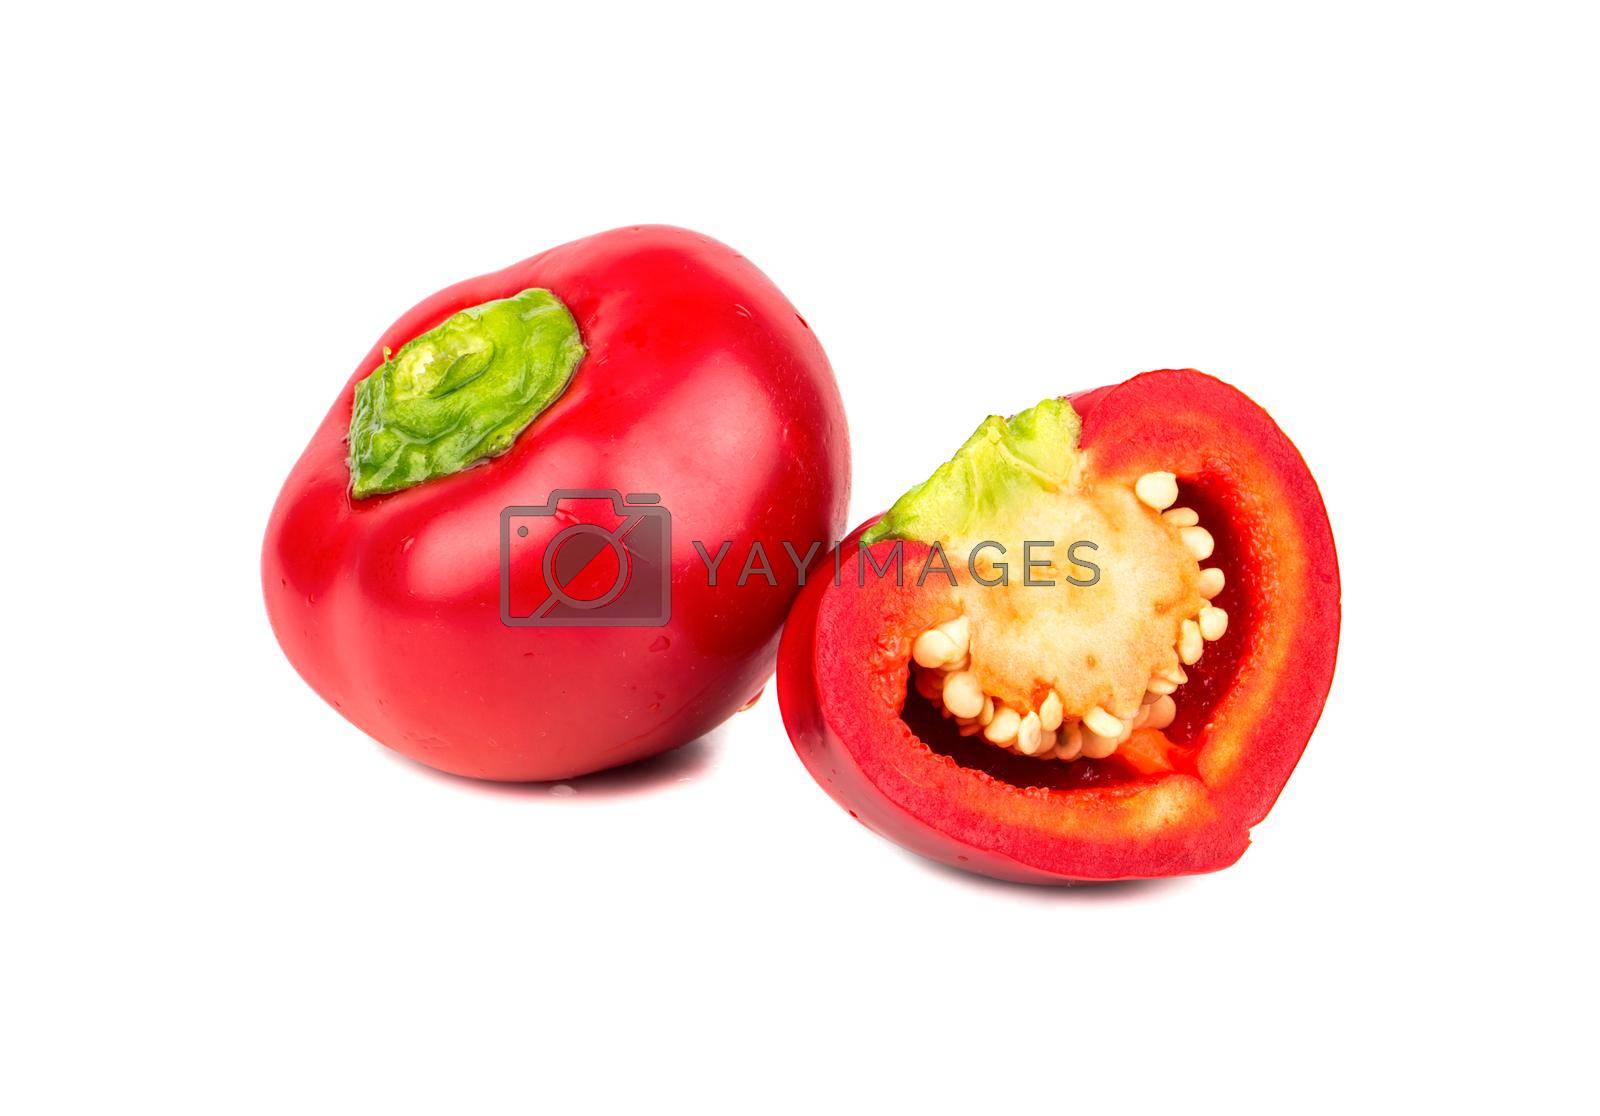 Royalty free image of Small red peppers by andregric